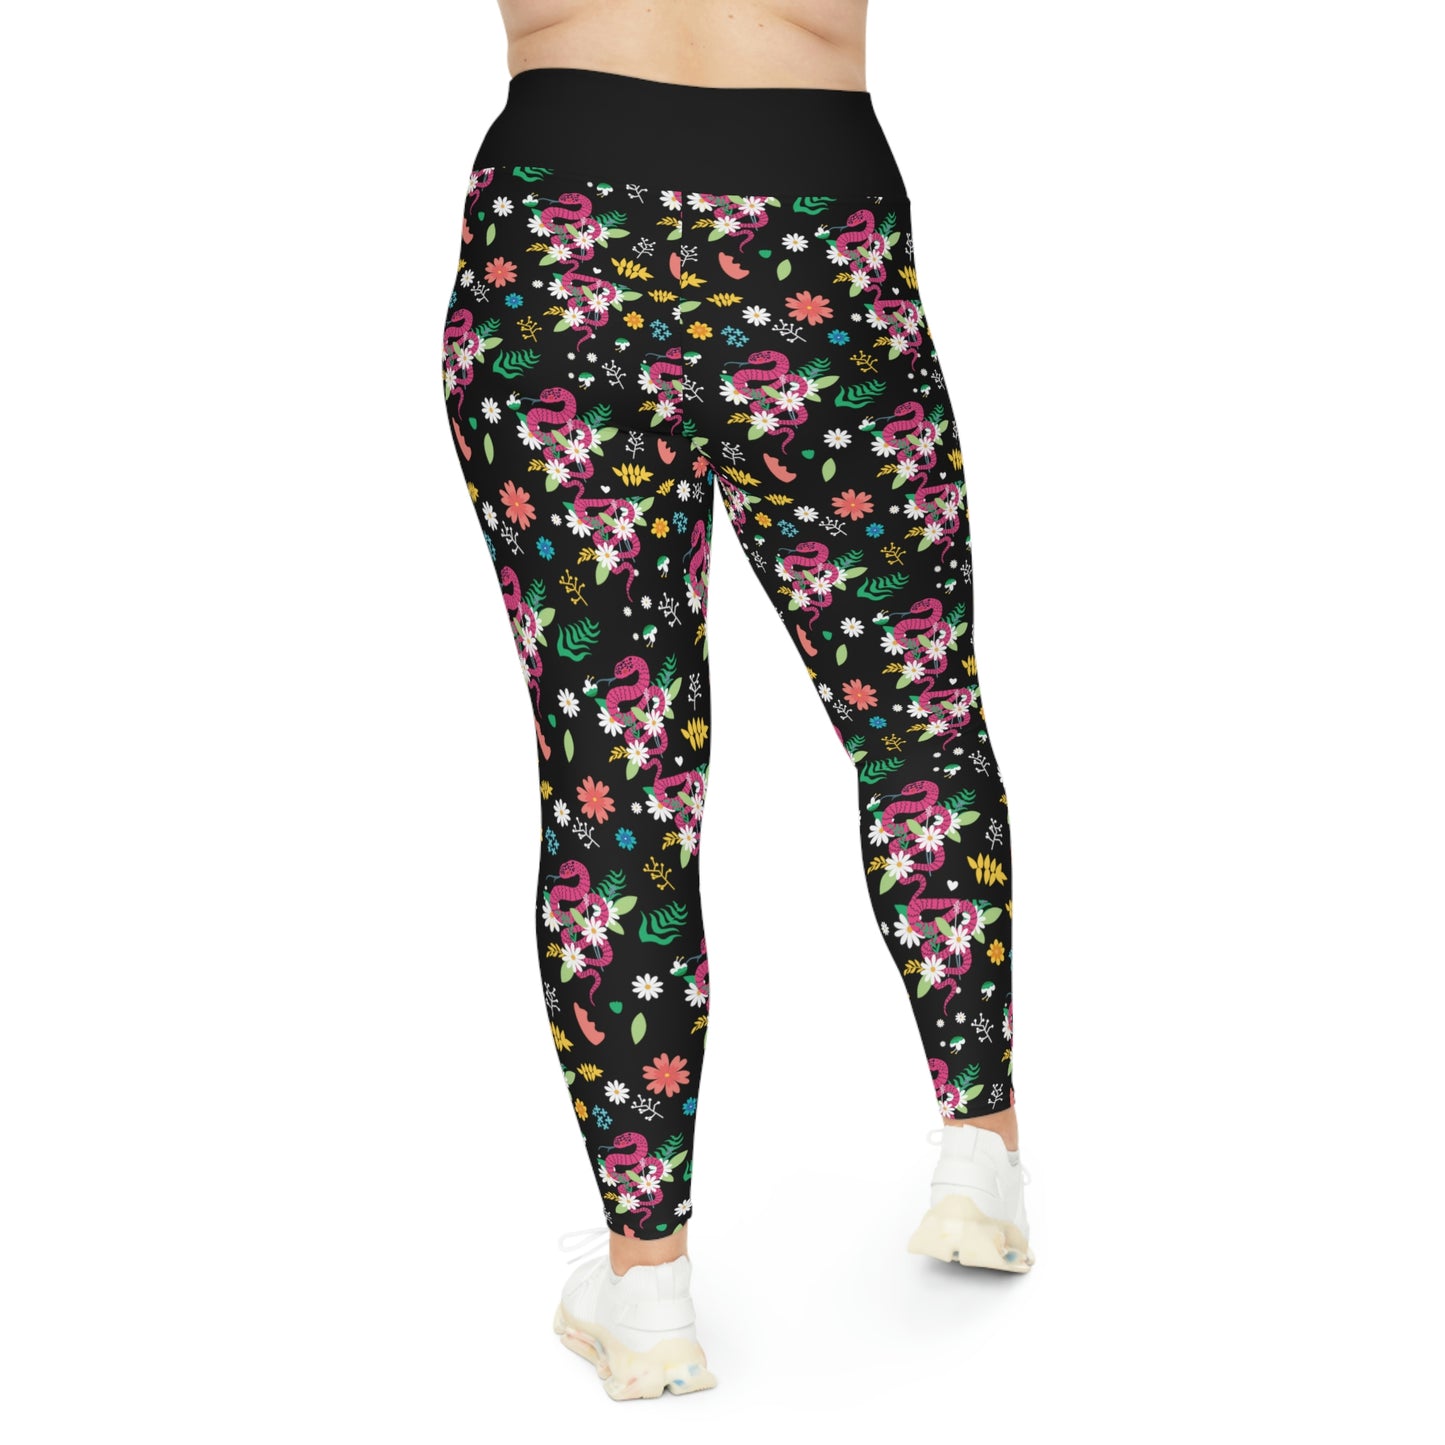 Snake Floral Plus Size Leggings One of a Kind Gift - Unique Workout Activewear tights for Mom fitness, Mothers Day, Girlfriend Christmas Gift